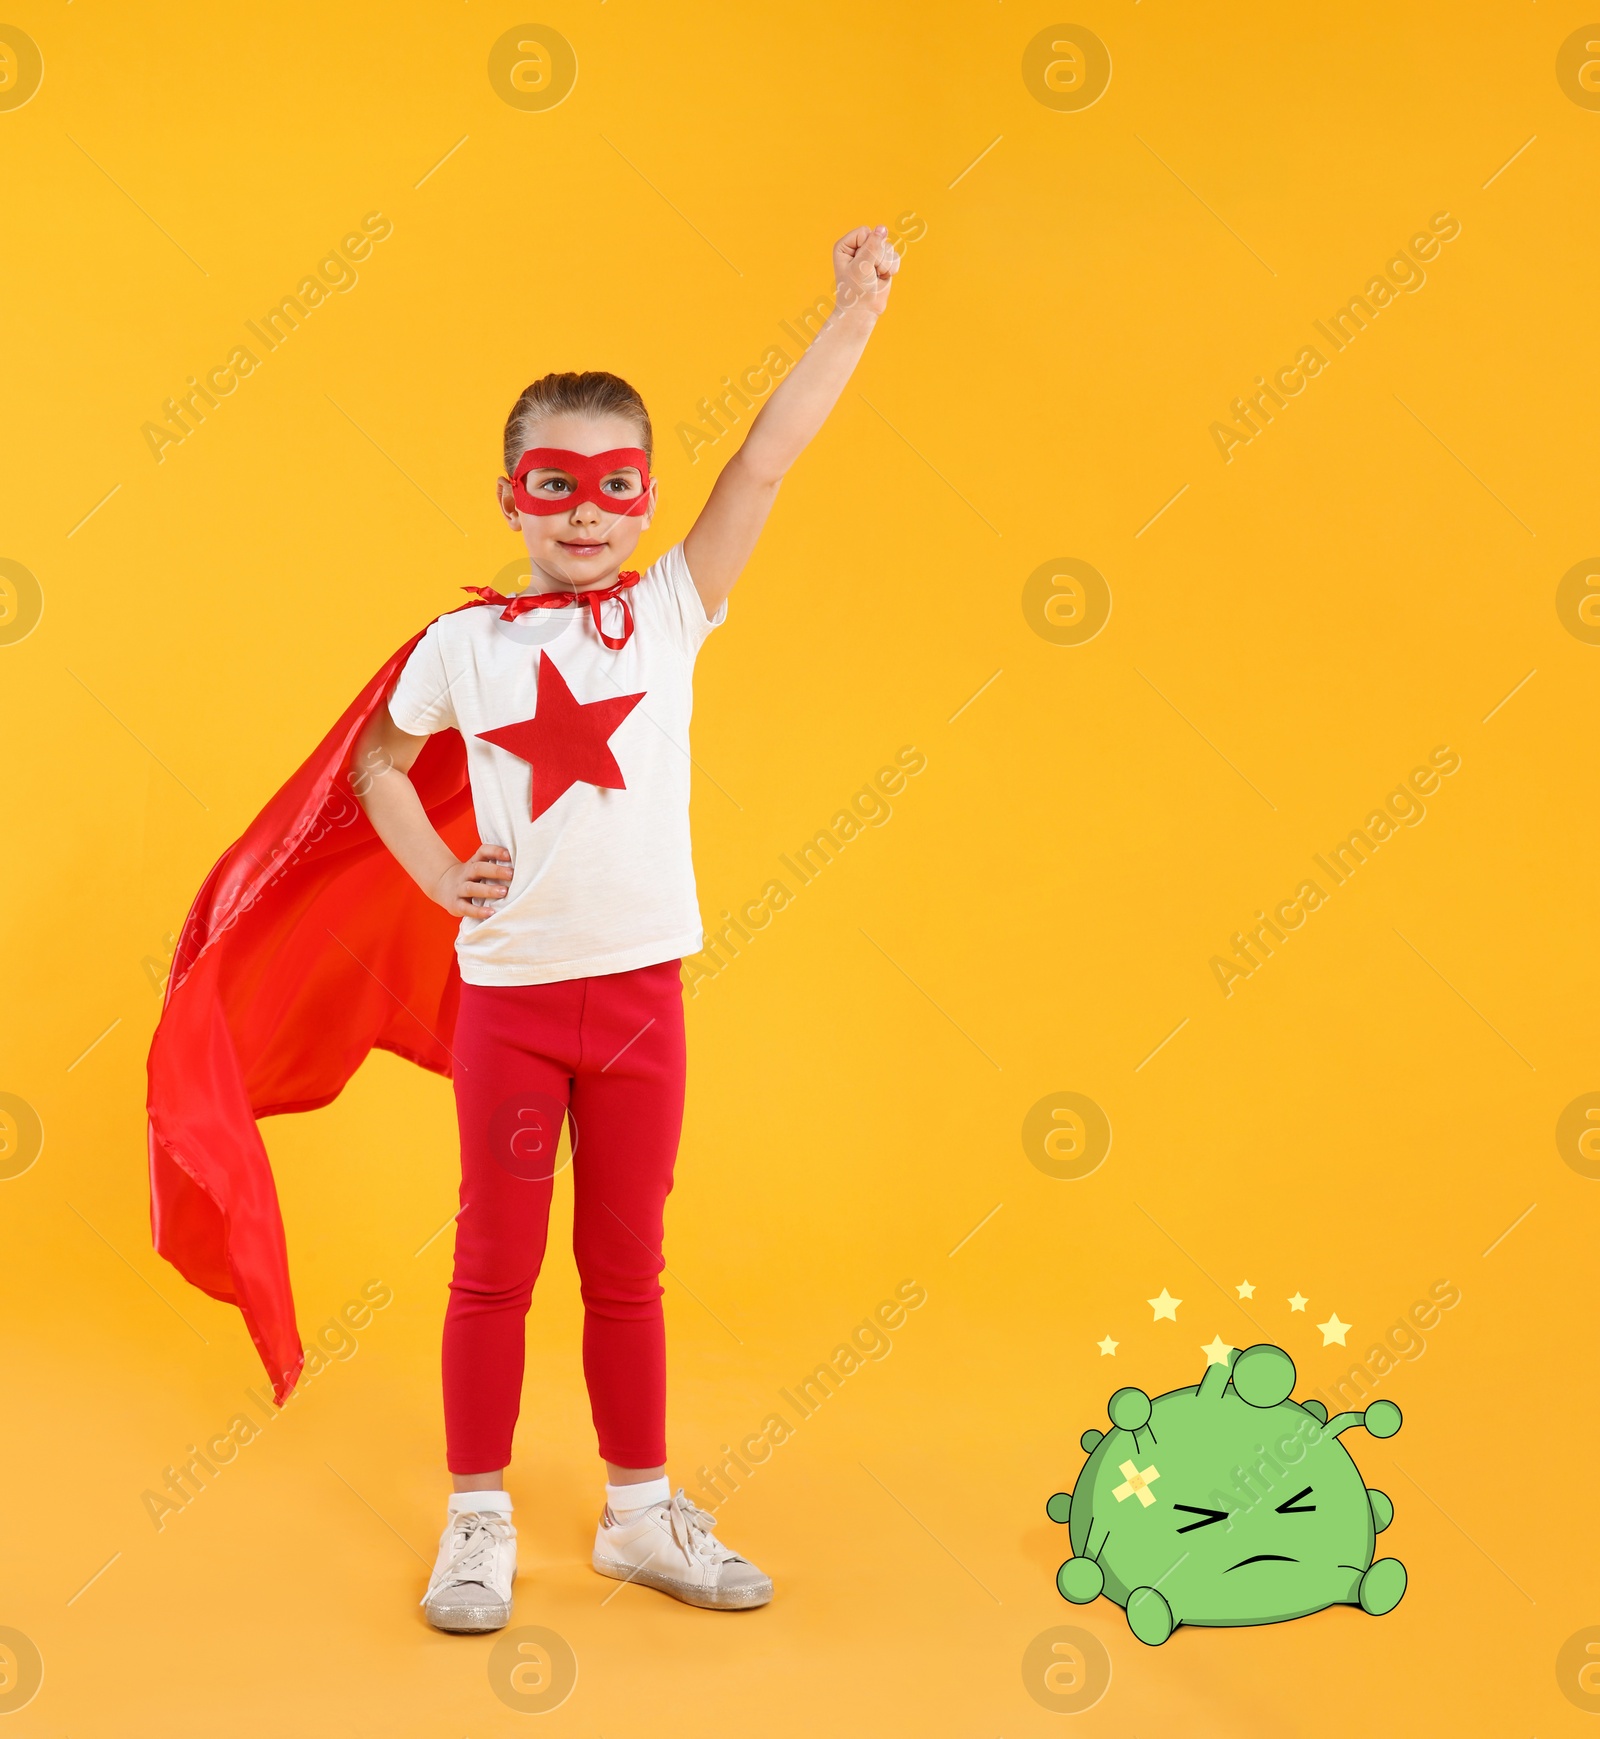 Image of Little girl wearing superhero costume won in fight against virus on yellow background